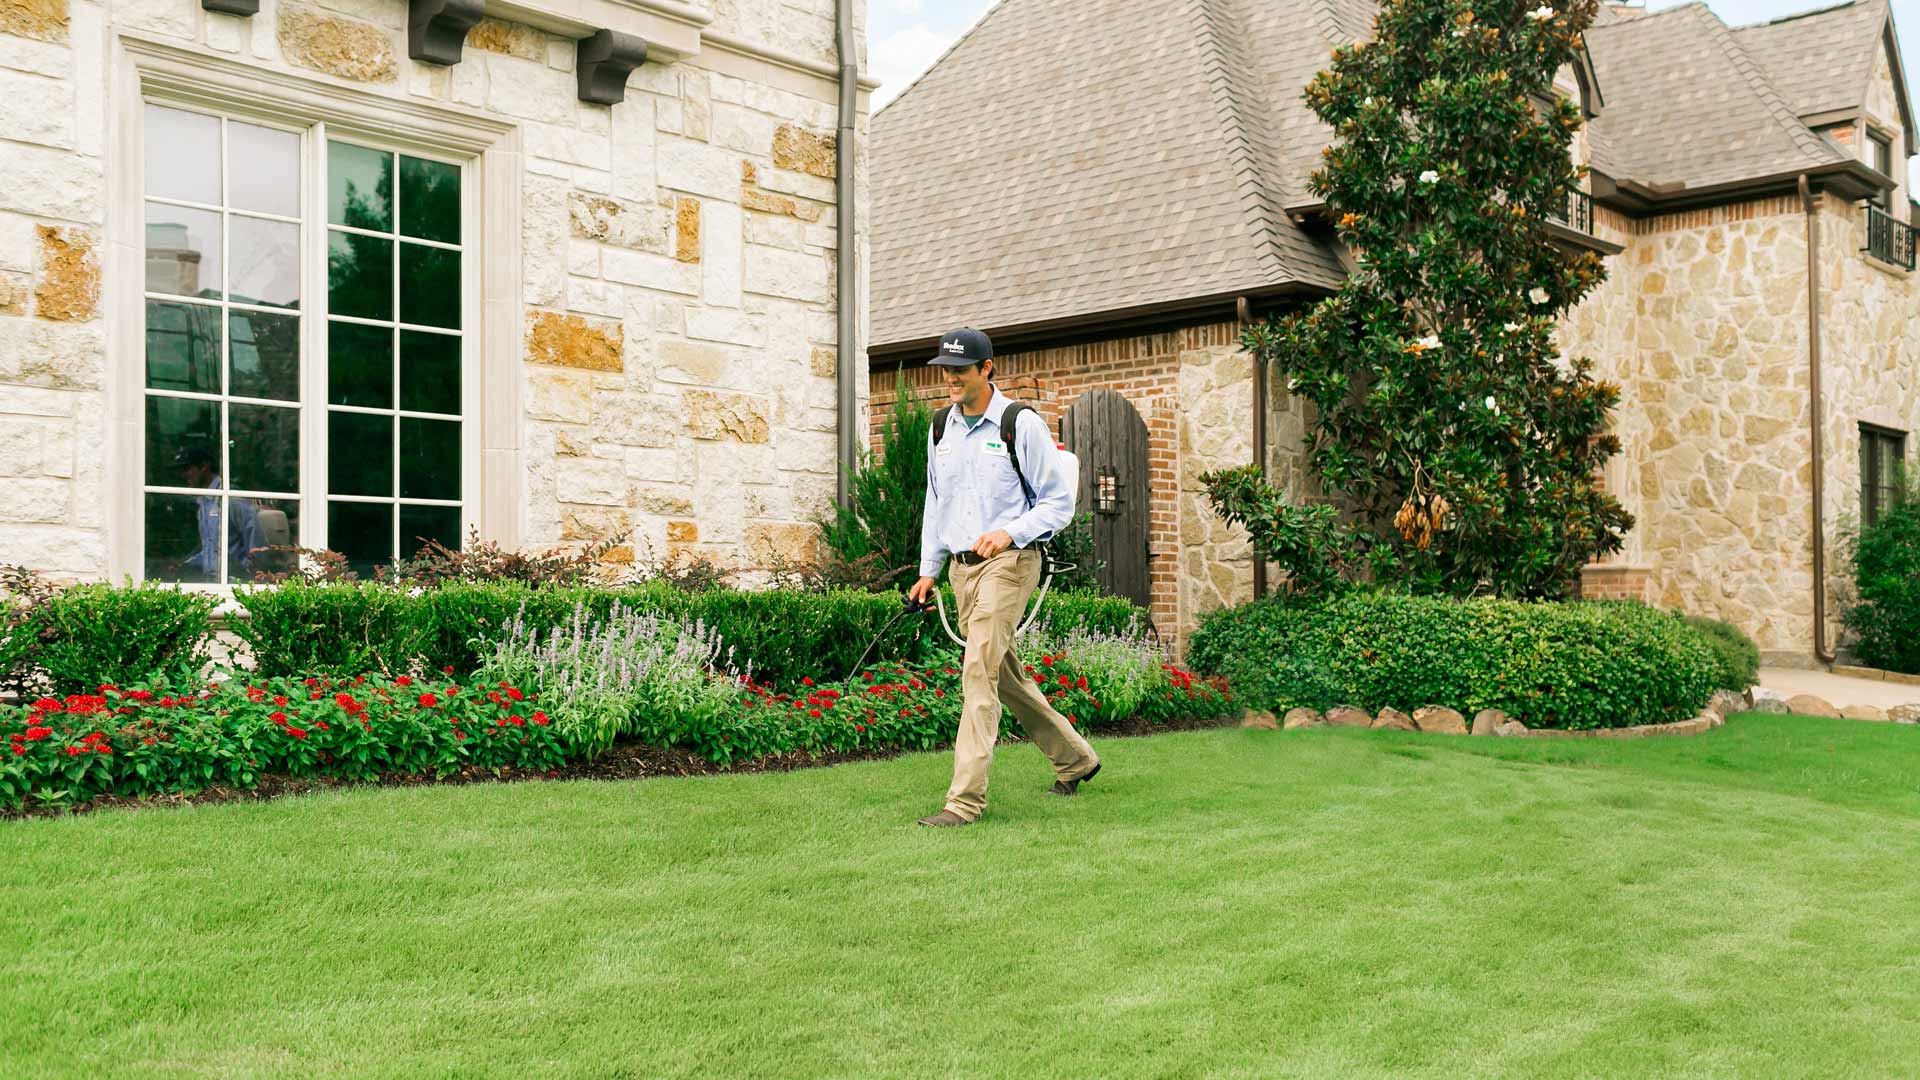 Pre-Emergent Weed Control: The Key to a Low-Maintenance Lawn